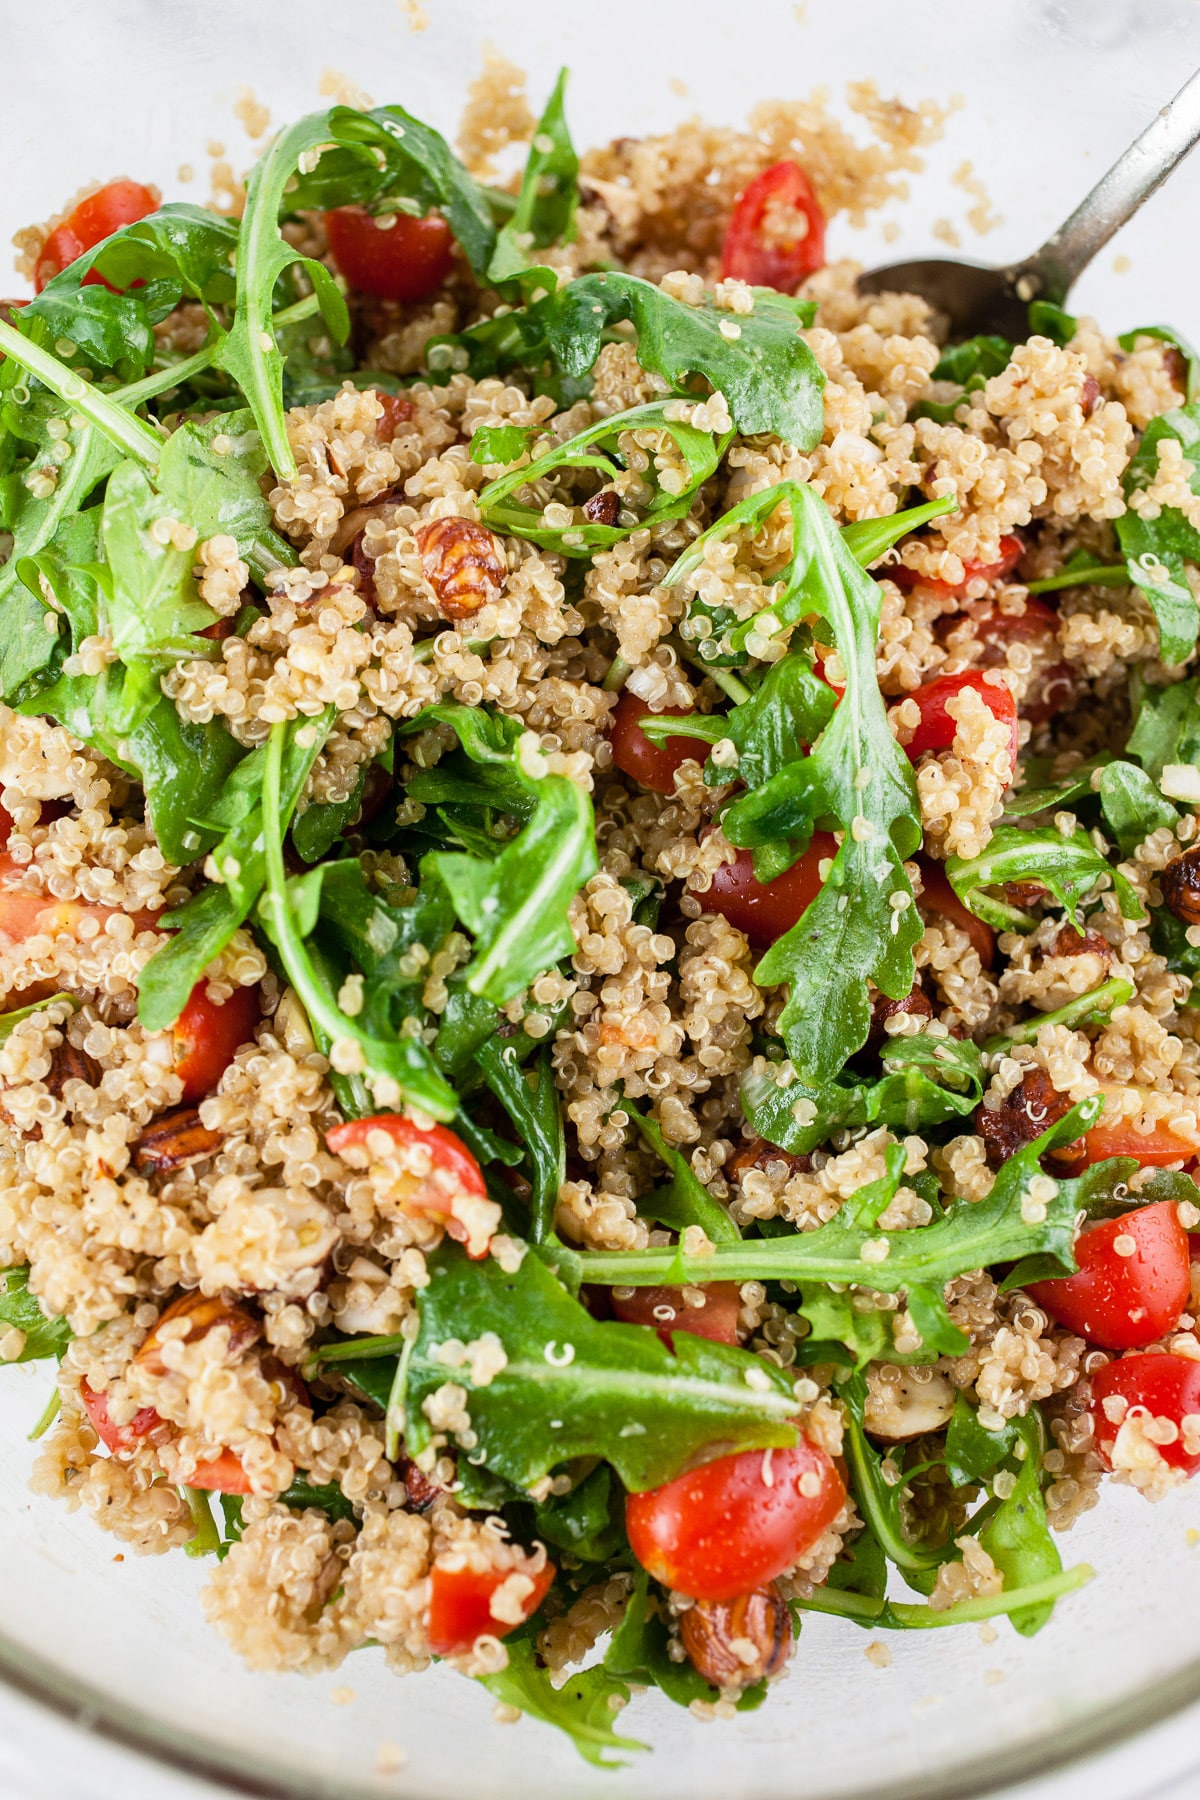 Quinoa salad tossed in large glass bowl with spoon.